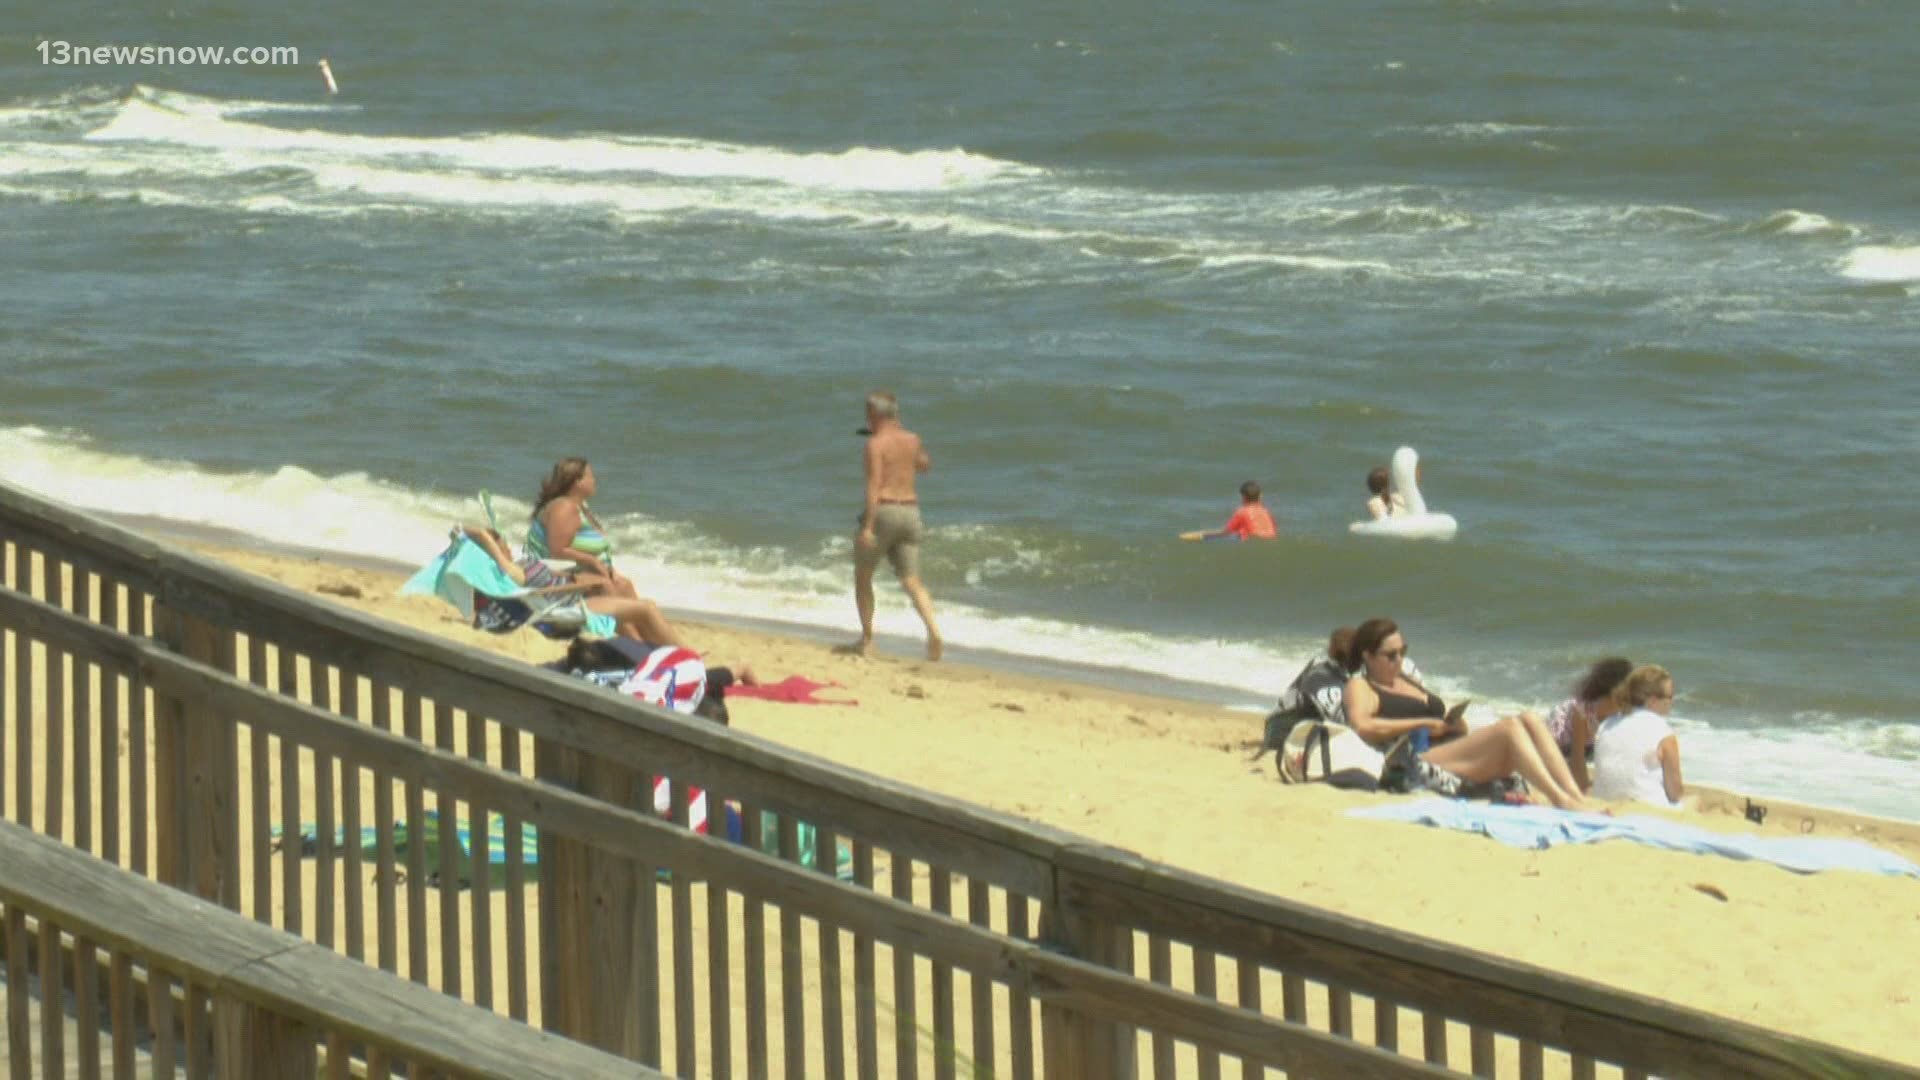 Revitalizing parts of Ocean View | 13newsnow.com